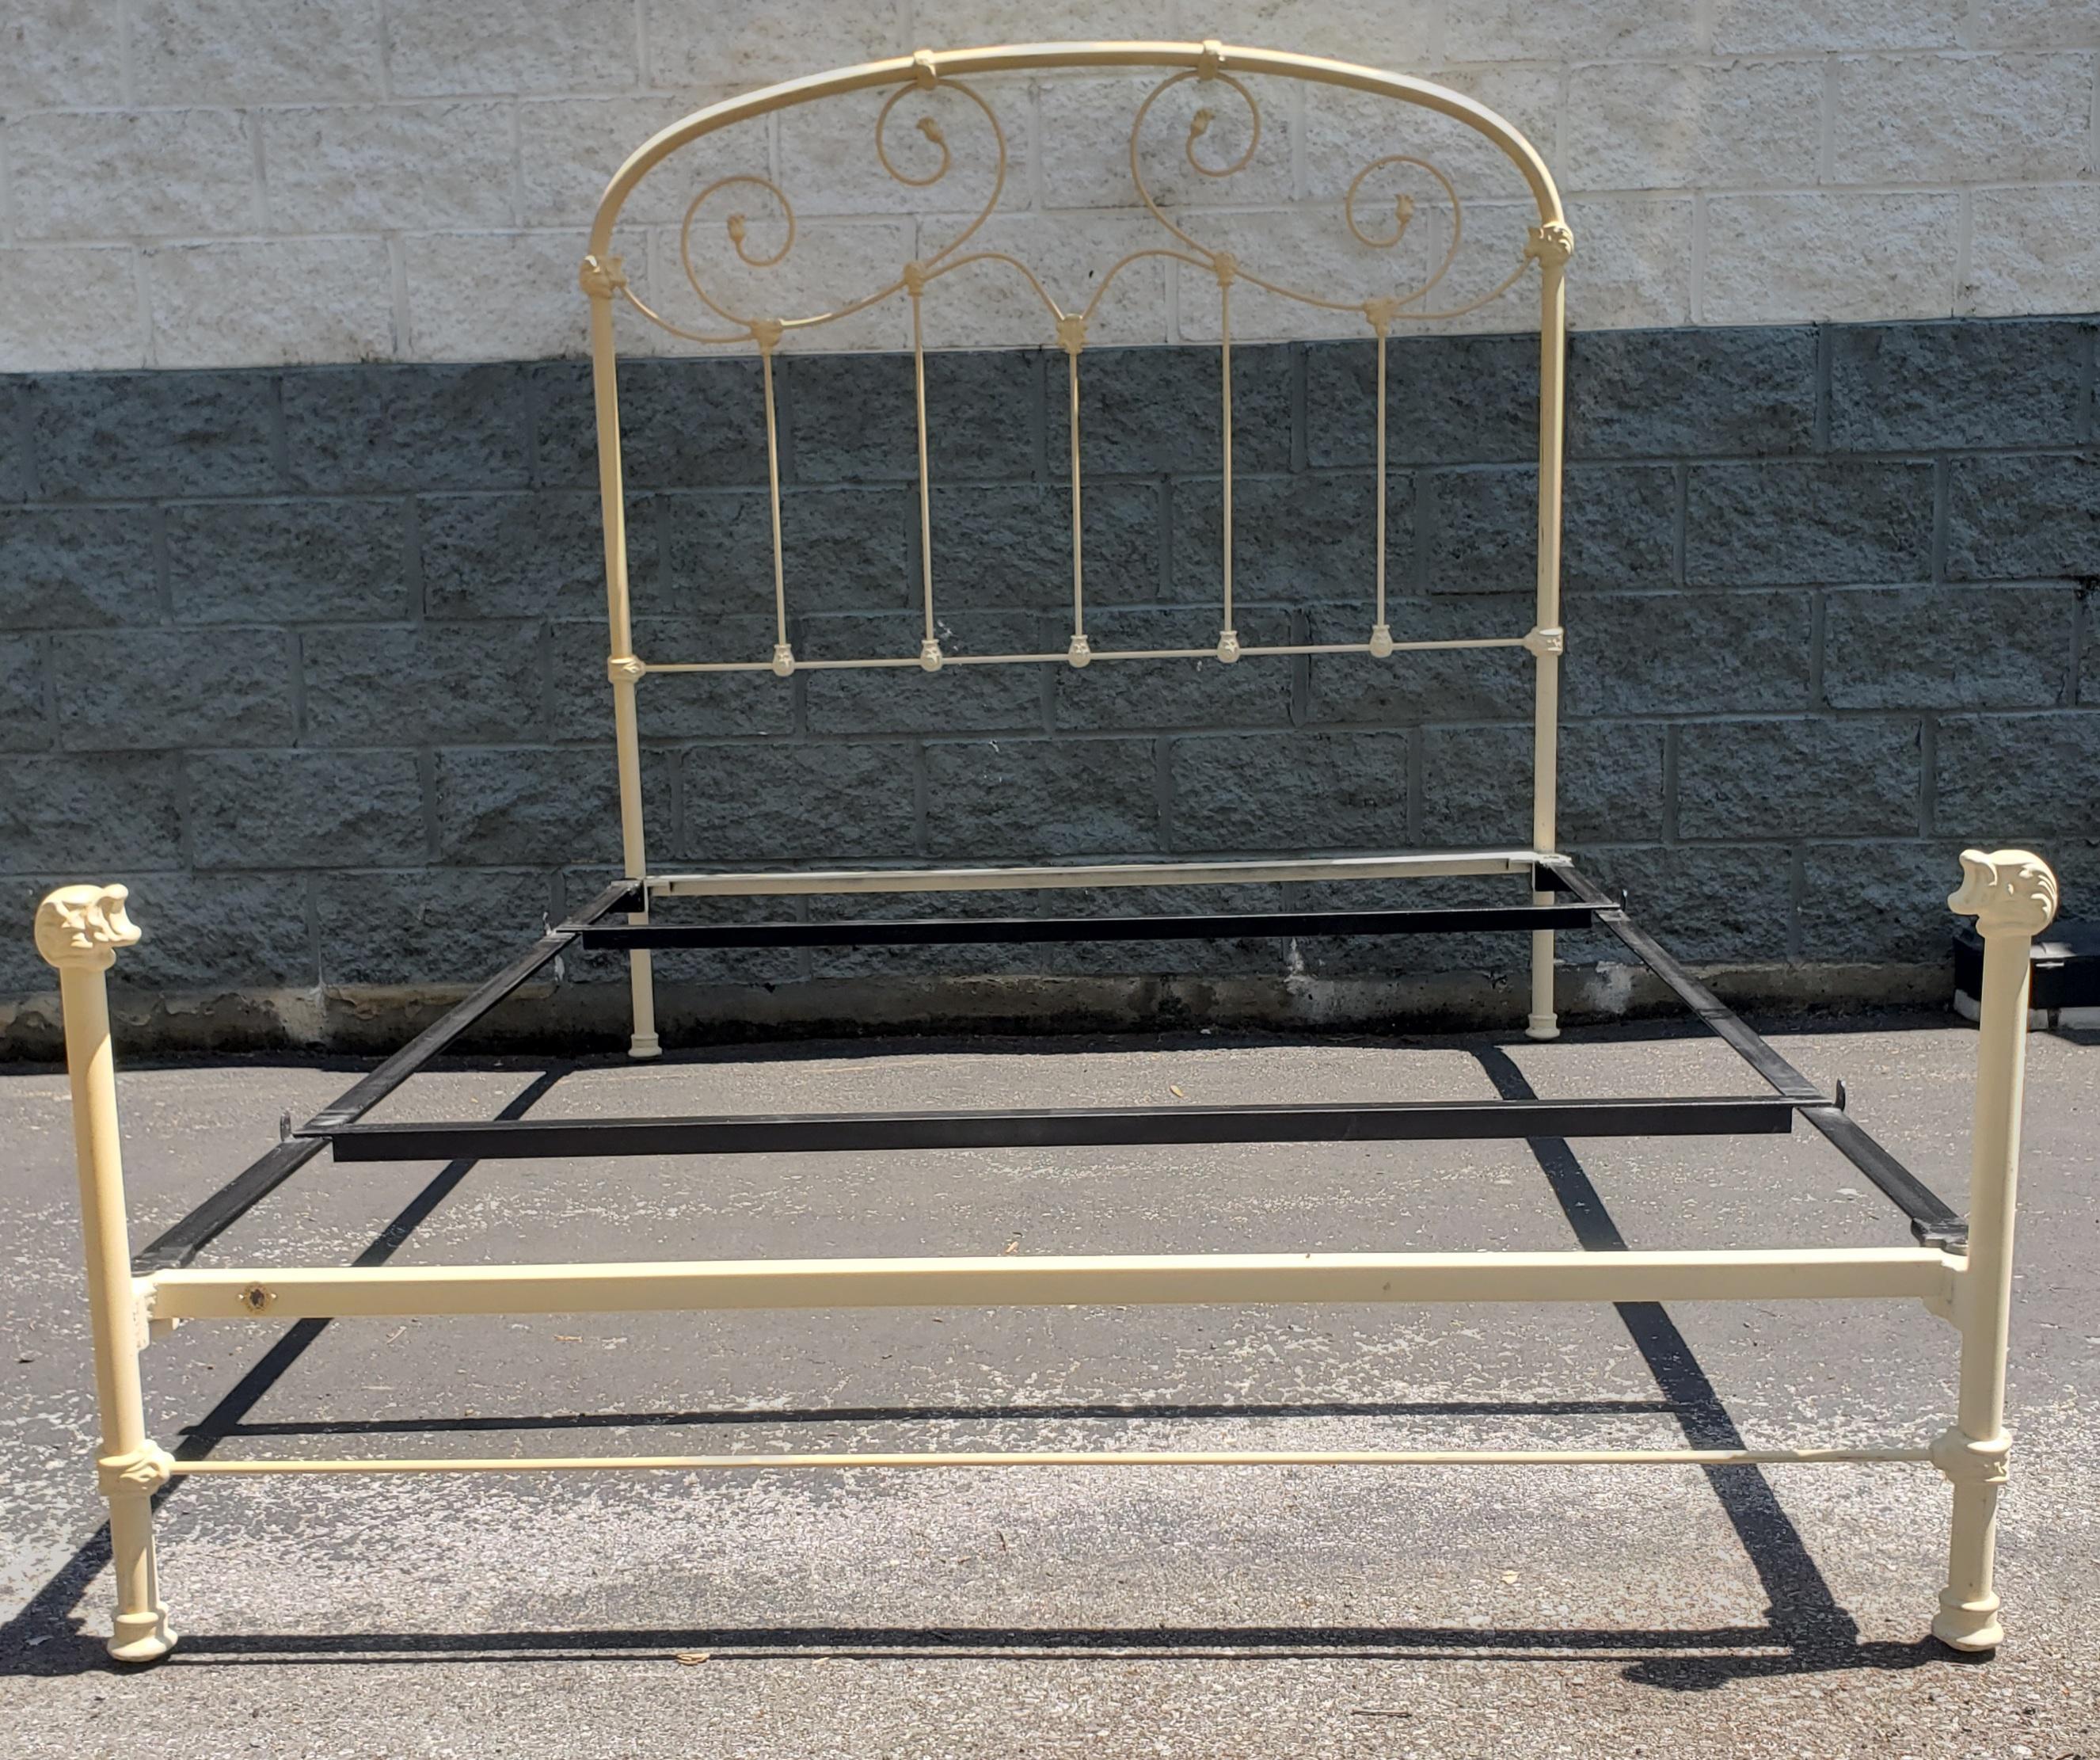 An Early 20th century Enamel Painted Metal Queen Size Bed in good vintage condition. Very sturdy. Solid metal. No metal tubing. Meaures 85